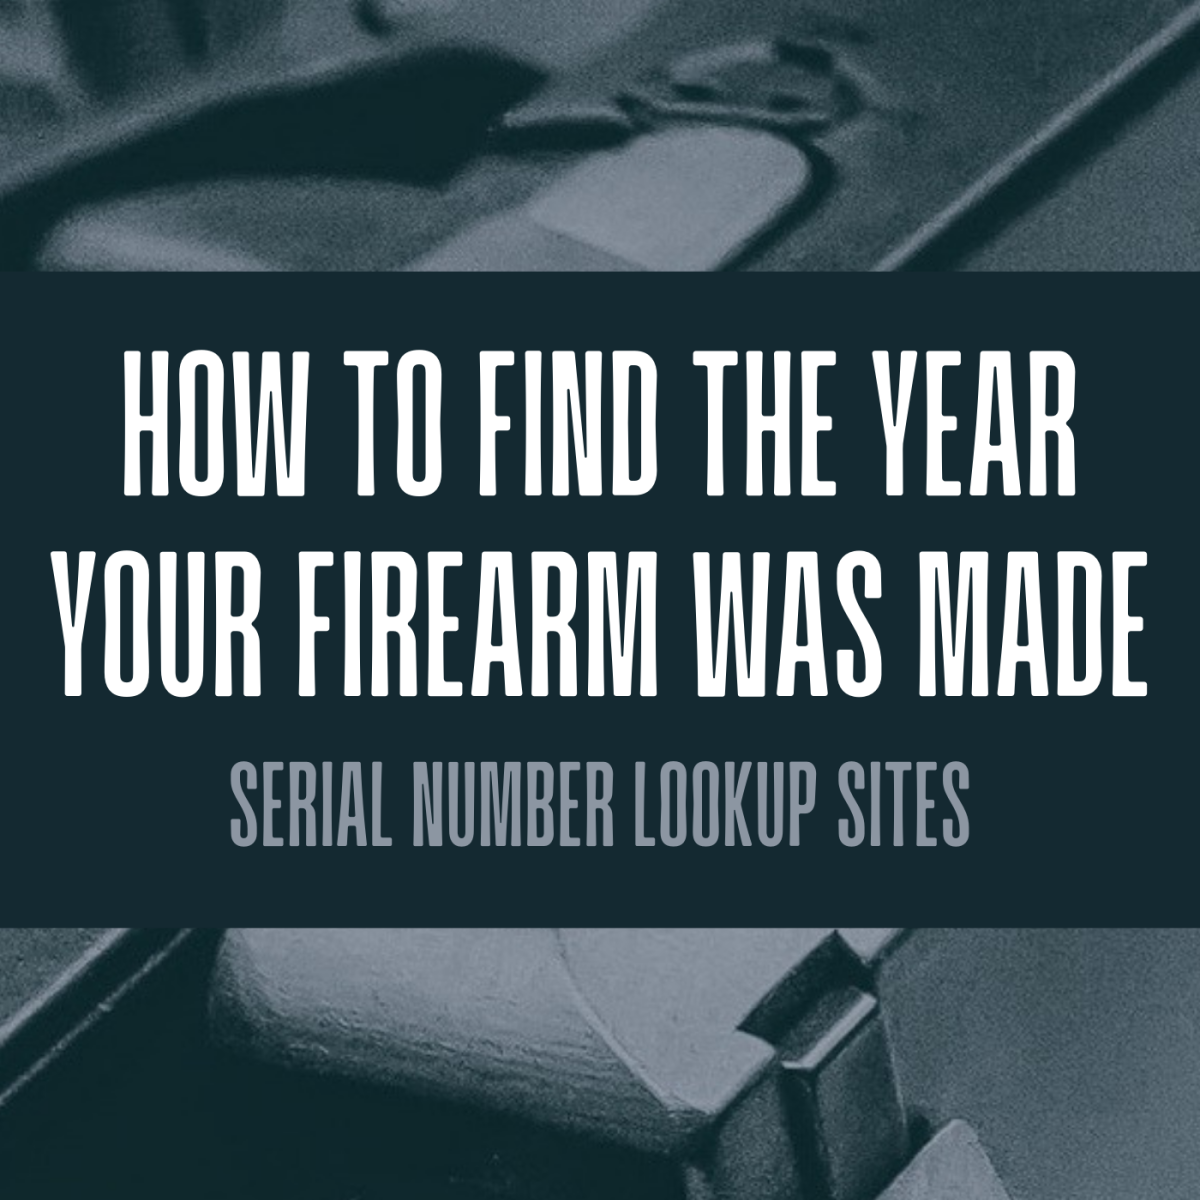 Learn how to date your gun by looking up its serial number on the right website.